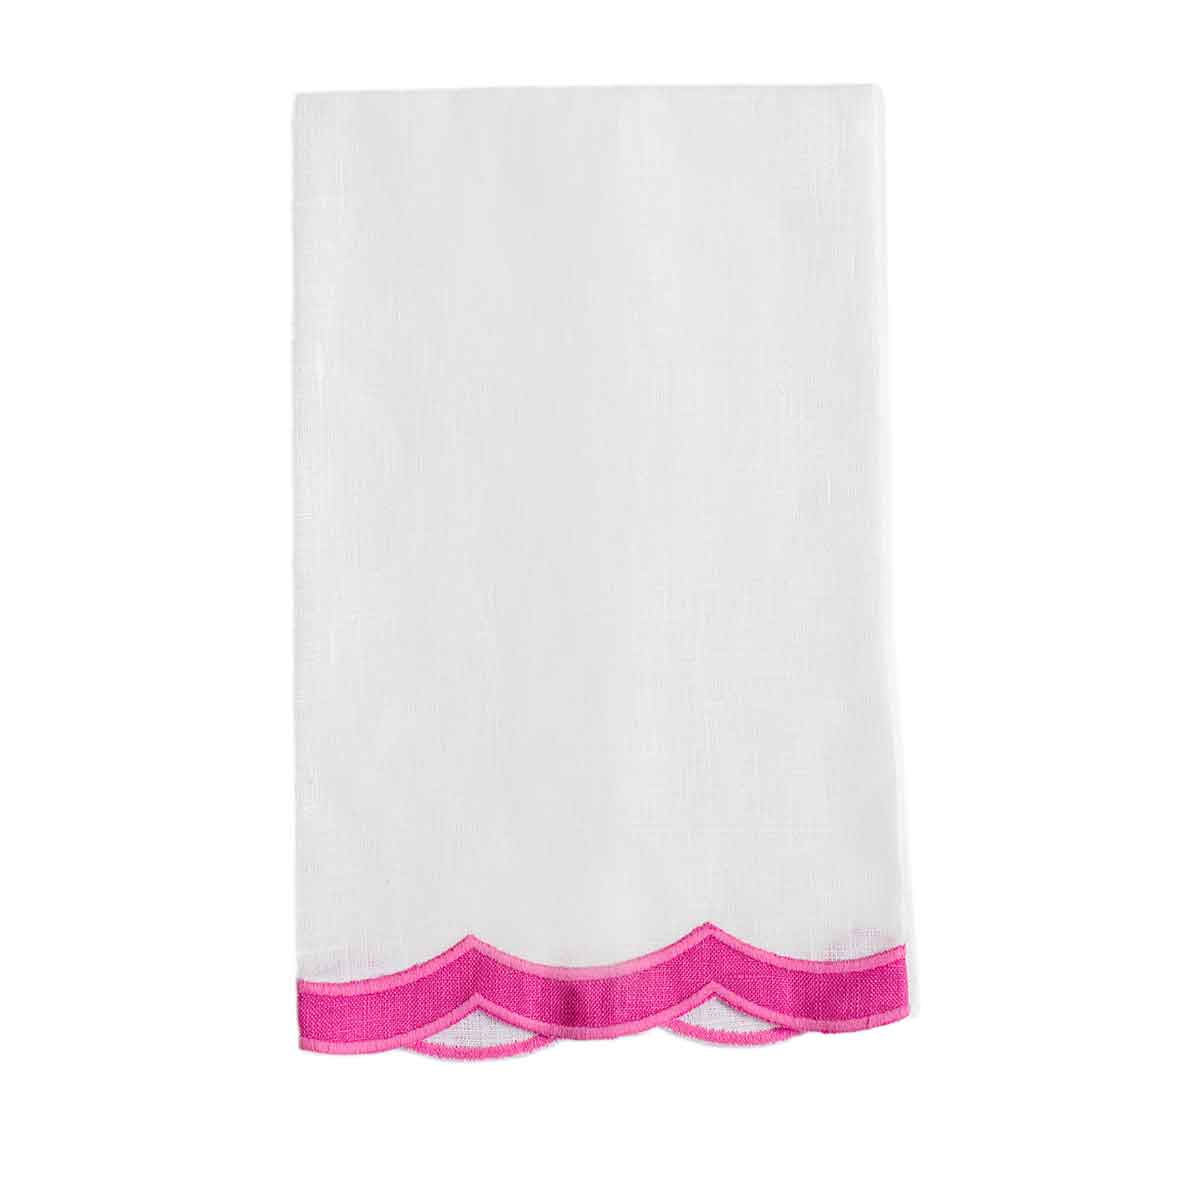 Double Happiness Guest Towel | Garden Folly Fine Linens - linen like hand towels, blank embroidery hand towels, guest hand towels linen